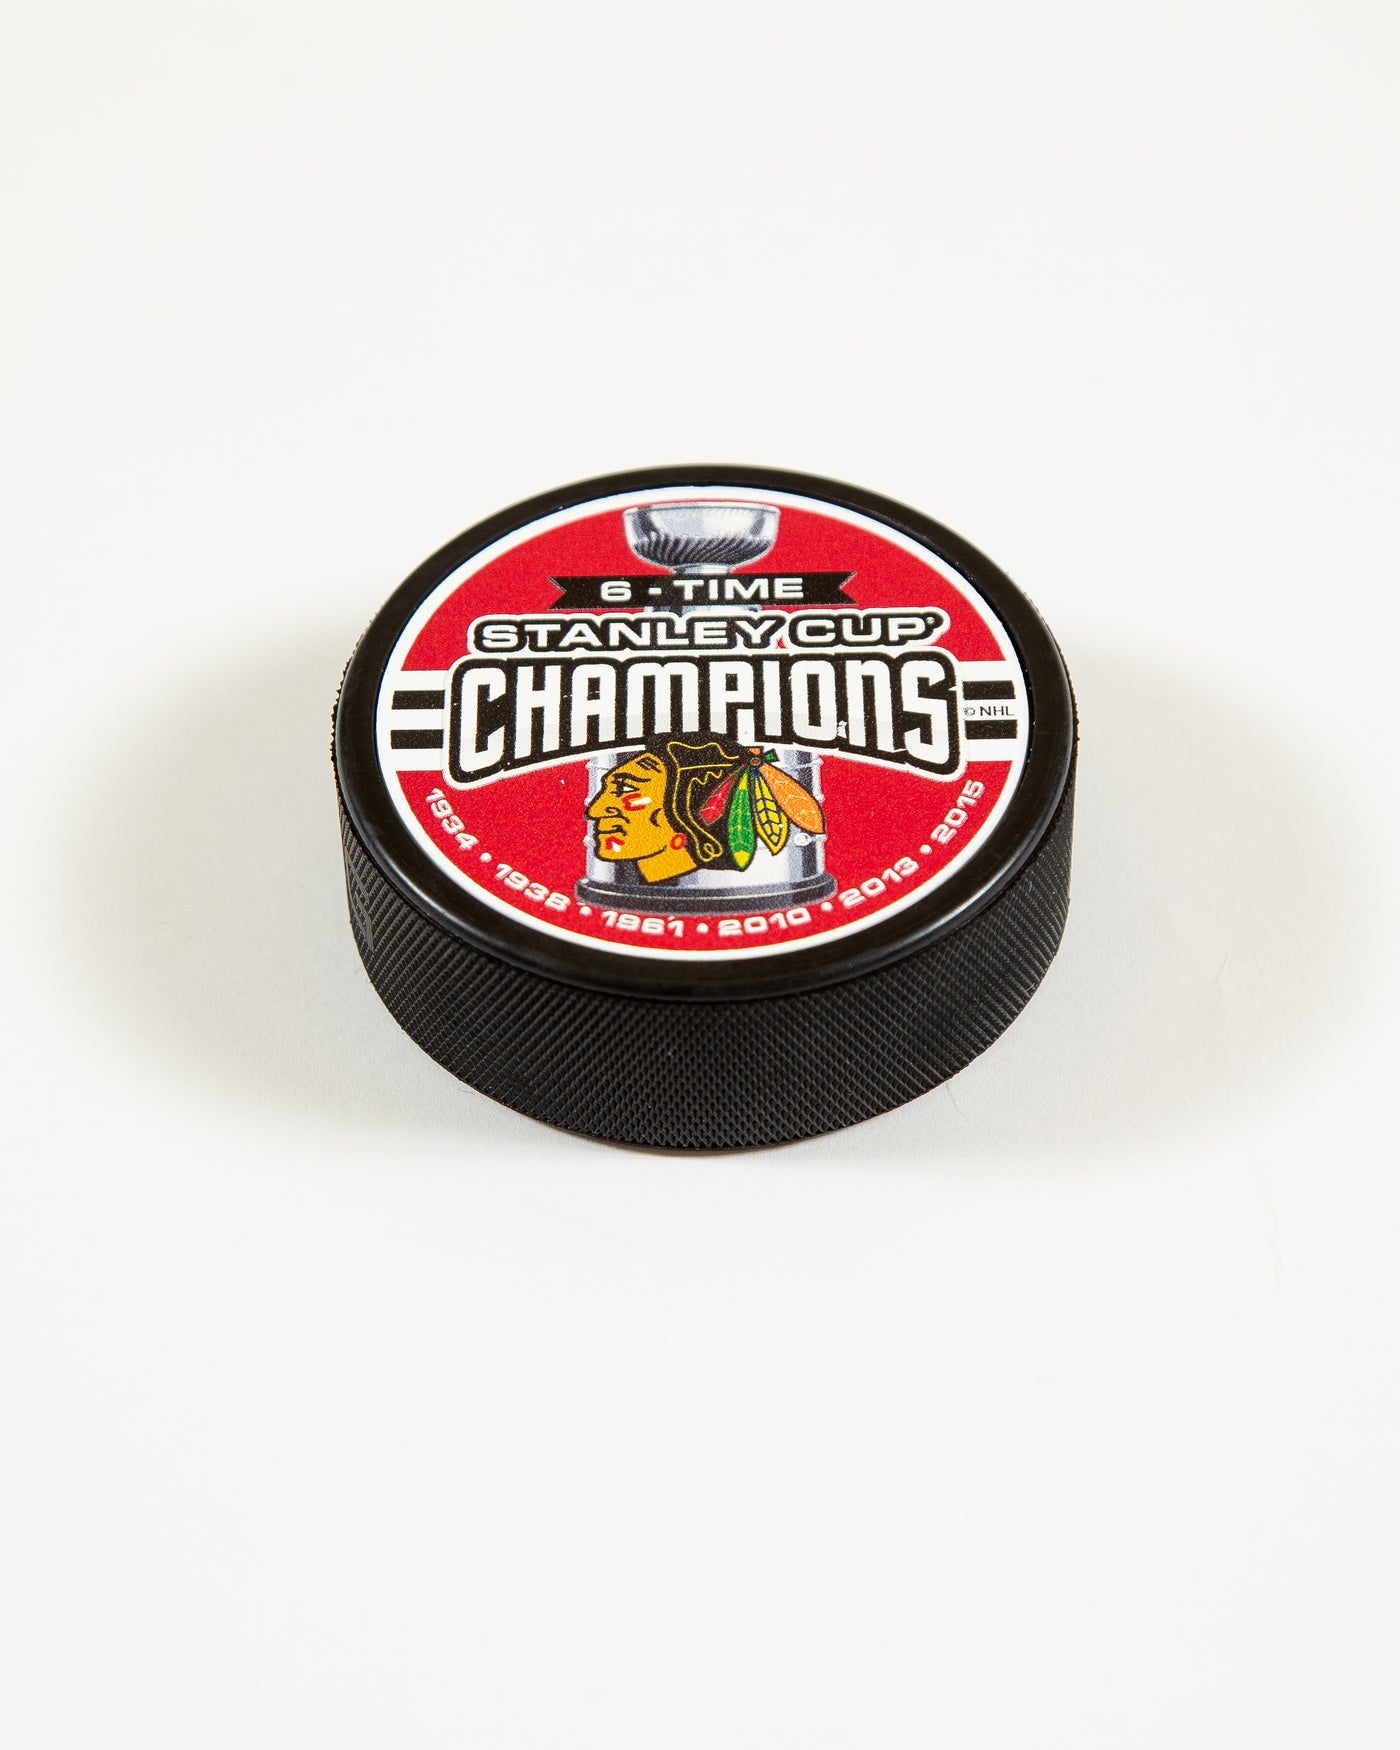 Chicago Blackhawks 6-tme Stanley Cup Champions designed puck - angled front view